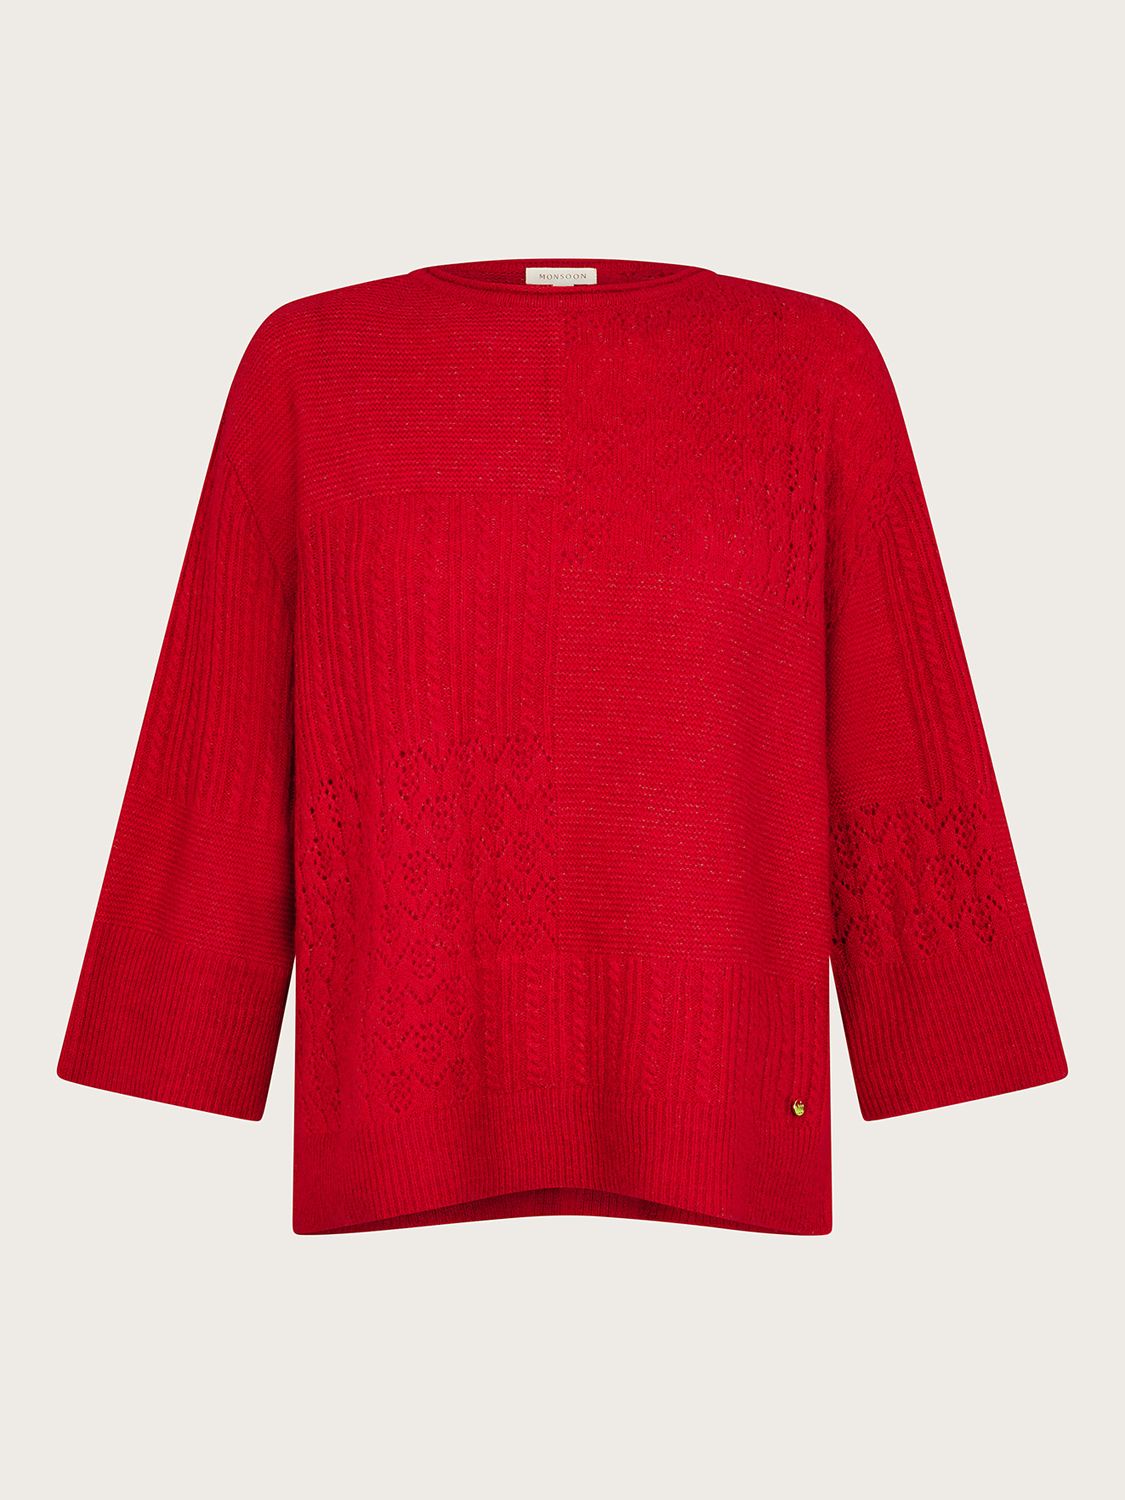 Monsoon San Supersoft Mixed Texture Jumper, Red, S